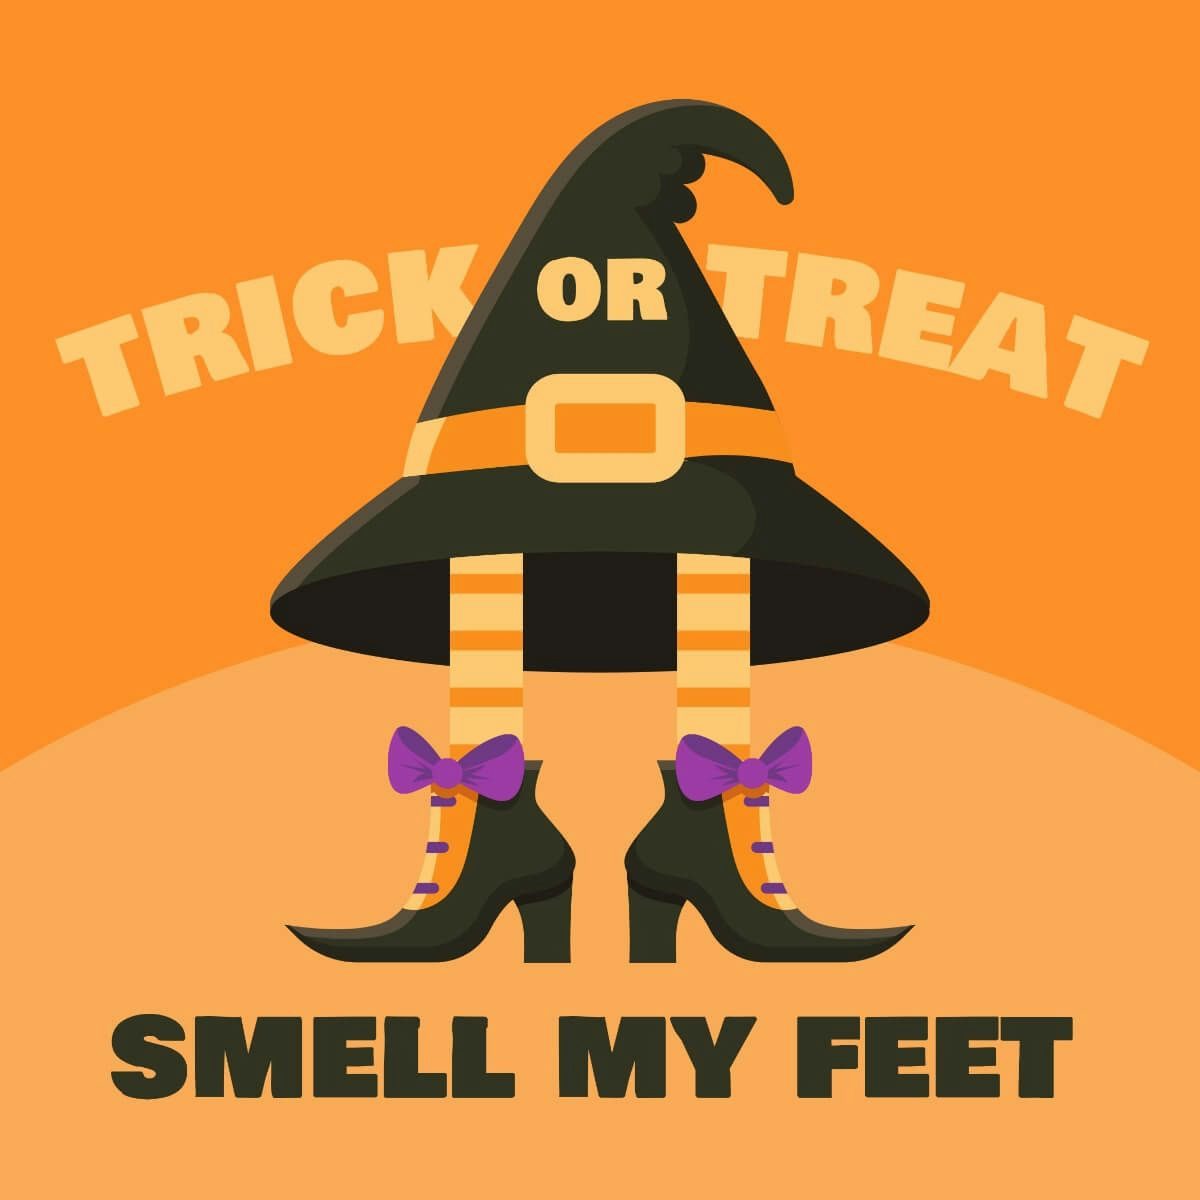 Card Trick or treat, smell my feet